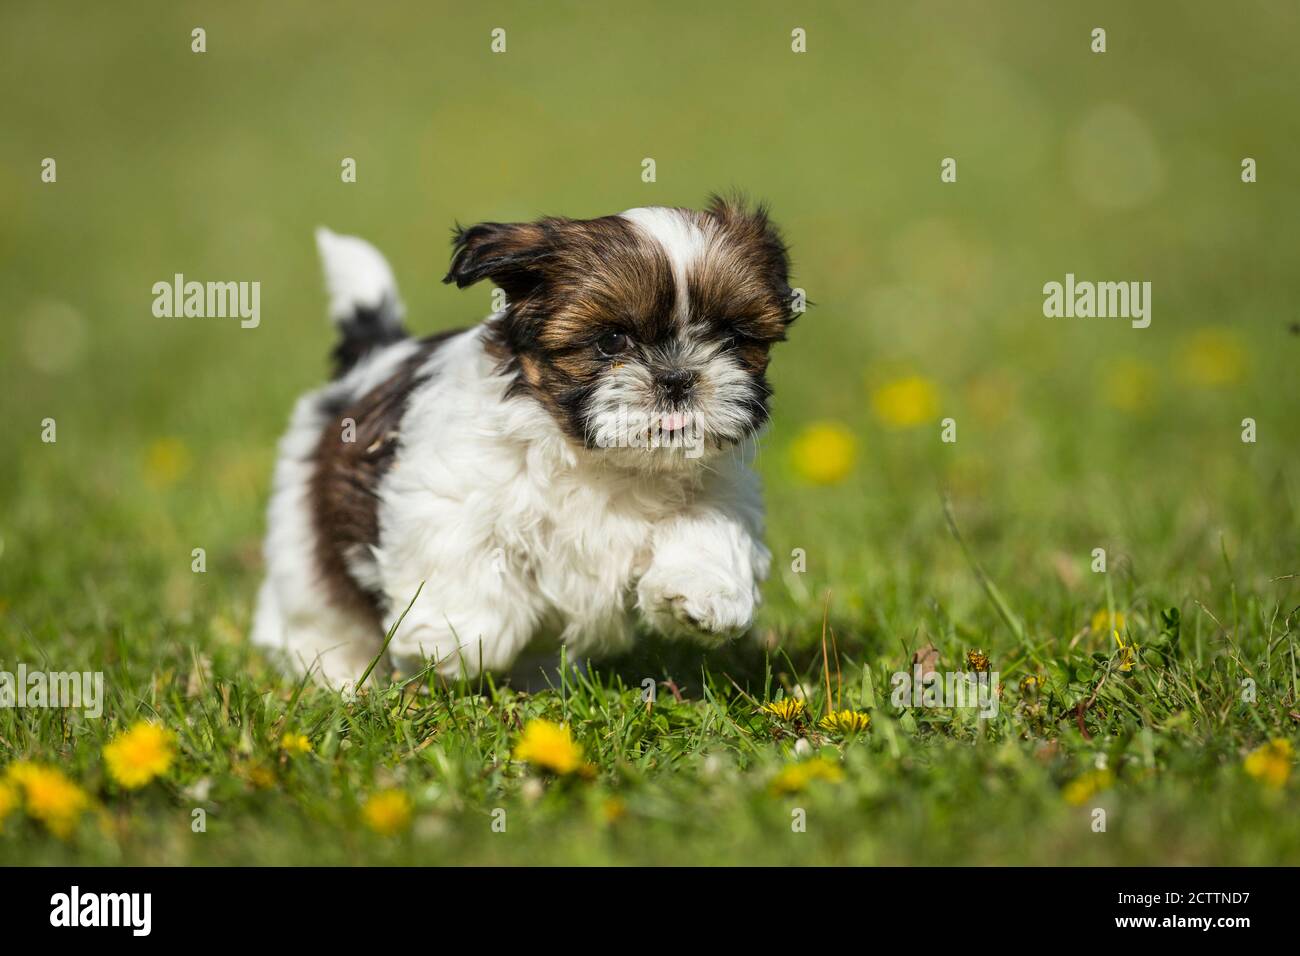 Shih Tzu. Puppy running on a meadow. Stock Photo